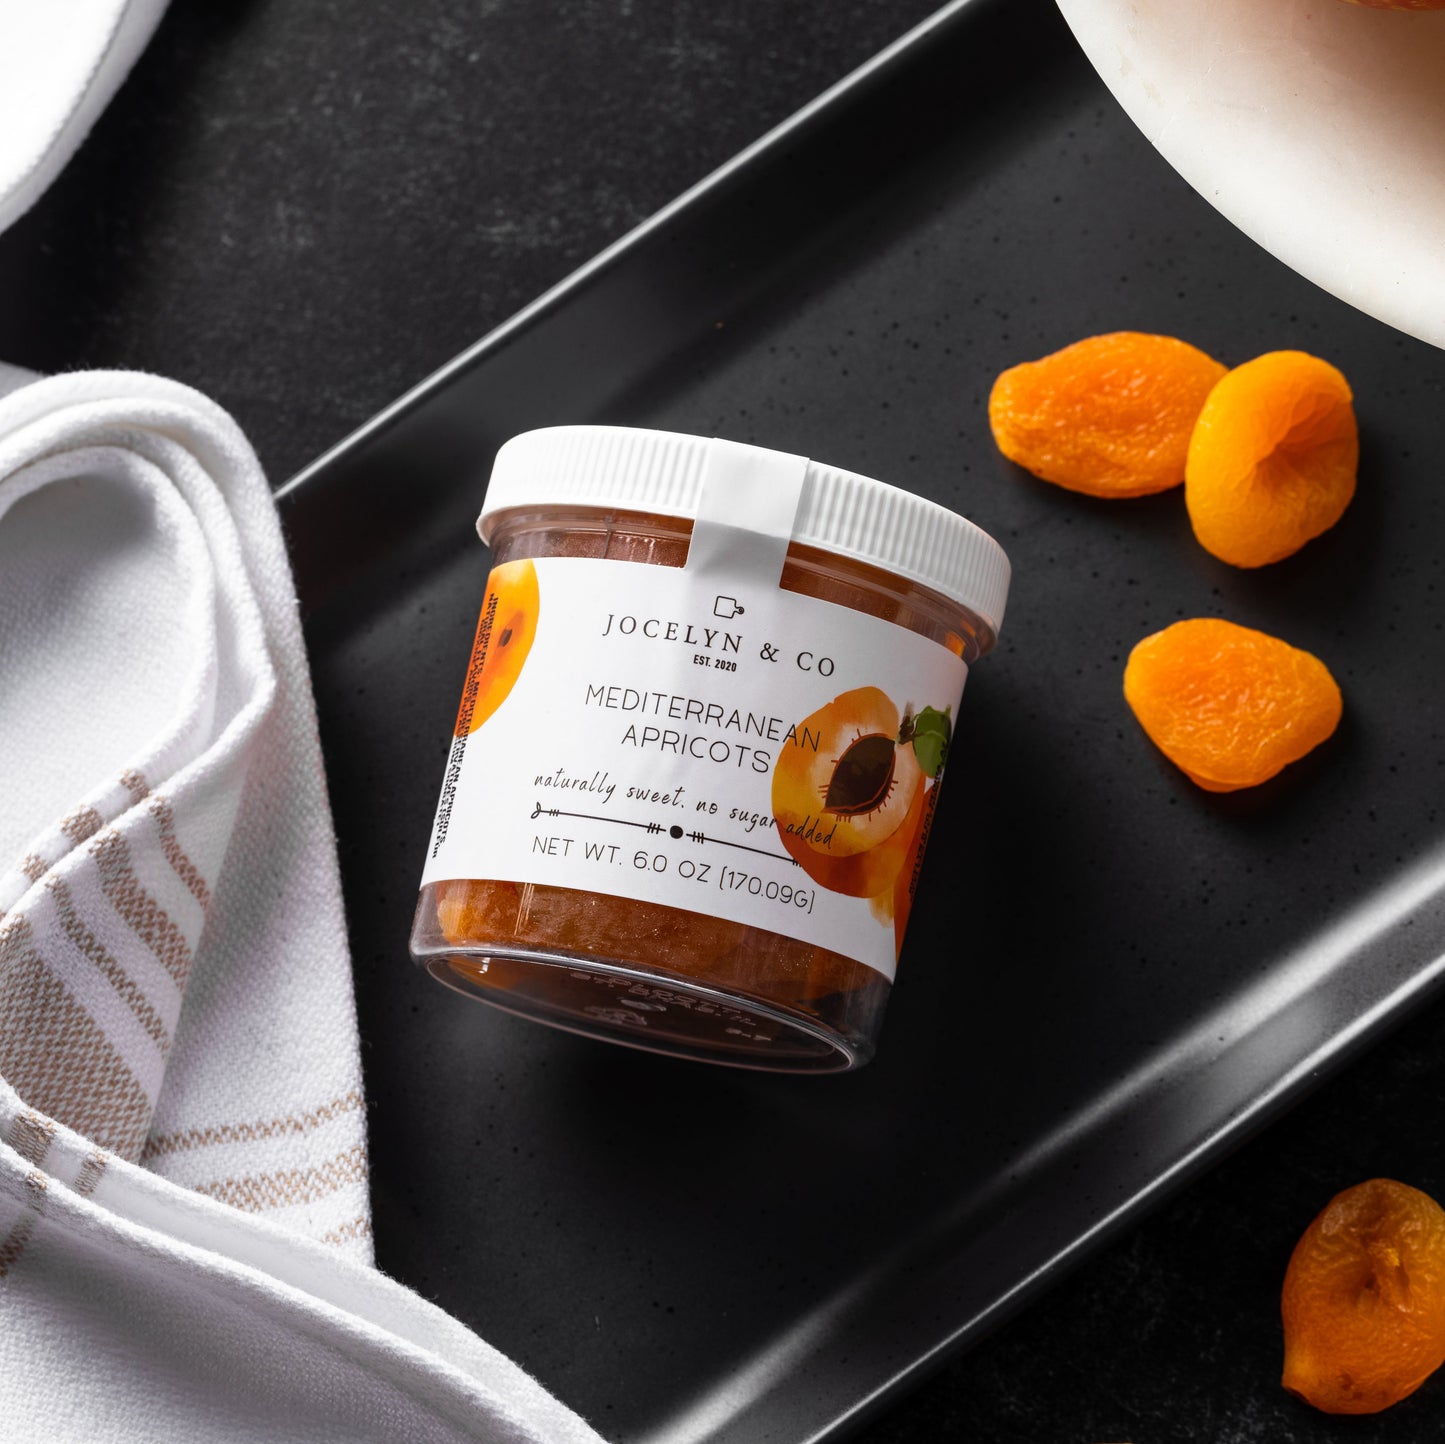 Private Label Packaging Only for Mediterrean Apricots-250